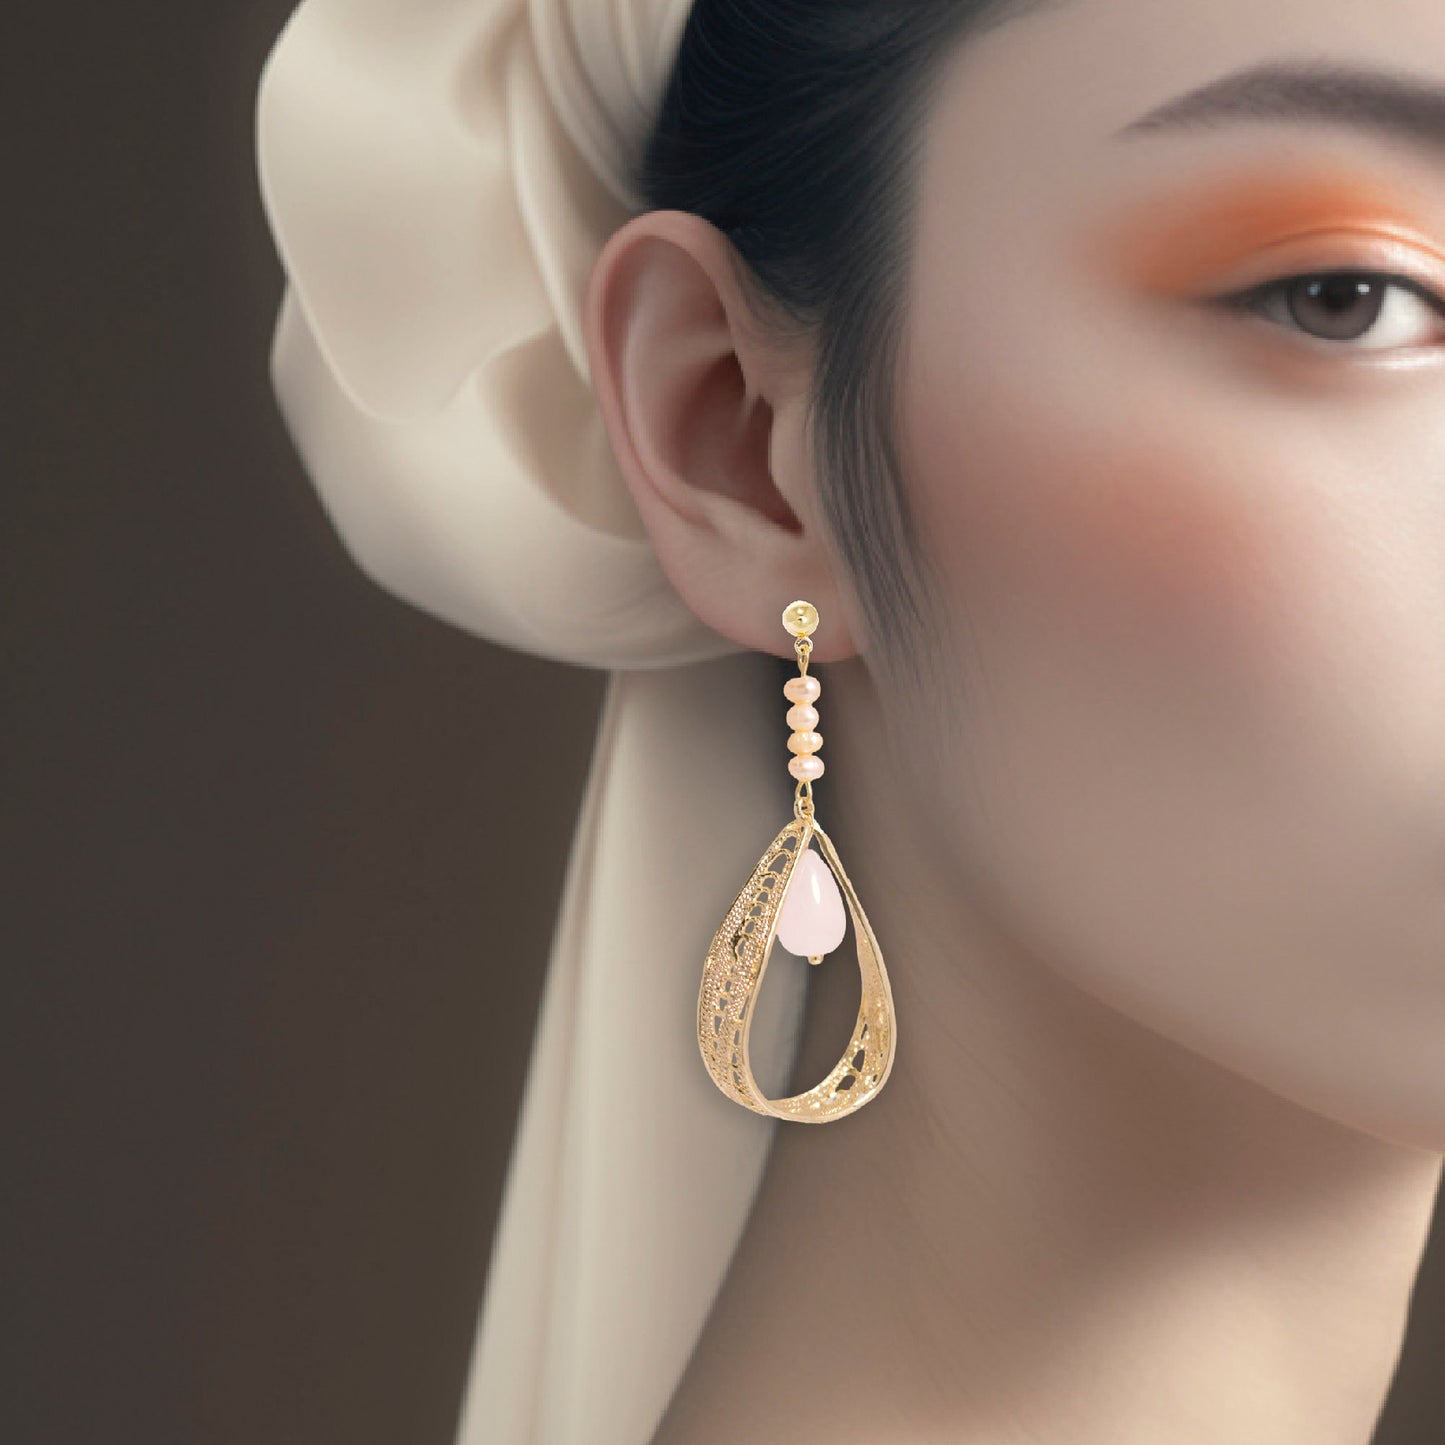 Oriental Motif Earrings with Rose Quartz - 14K Real Gold Plated Jewelry